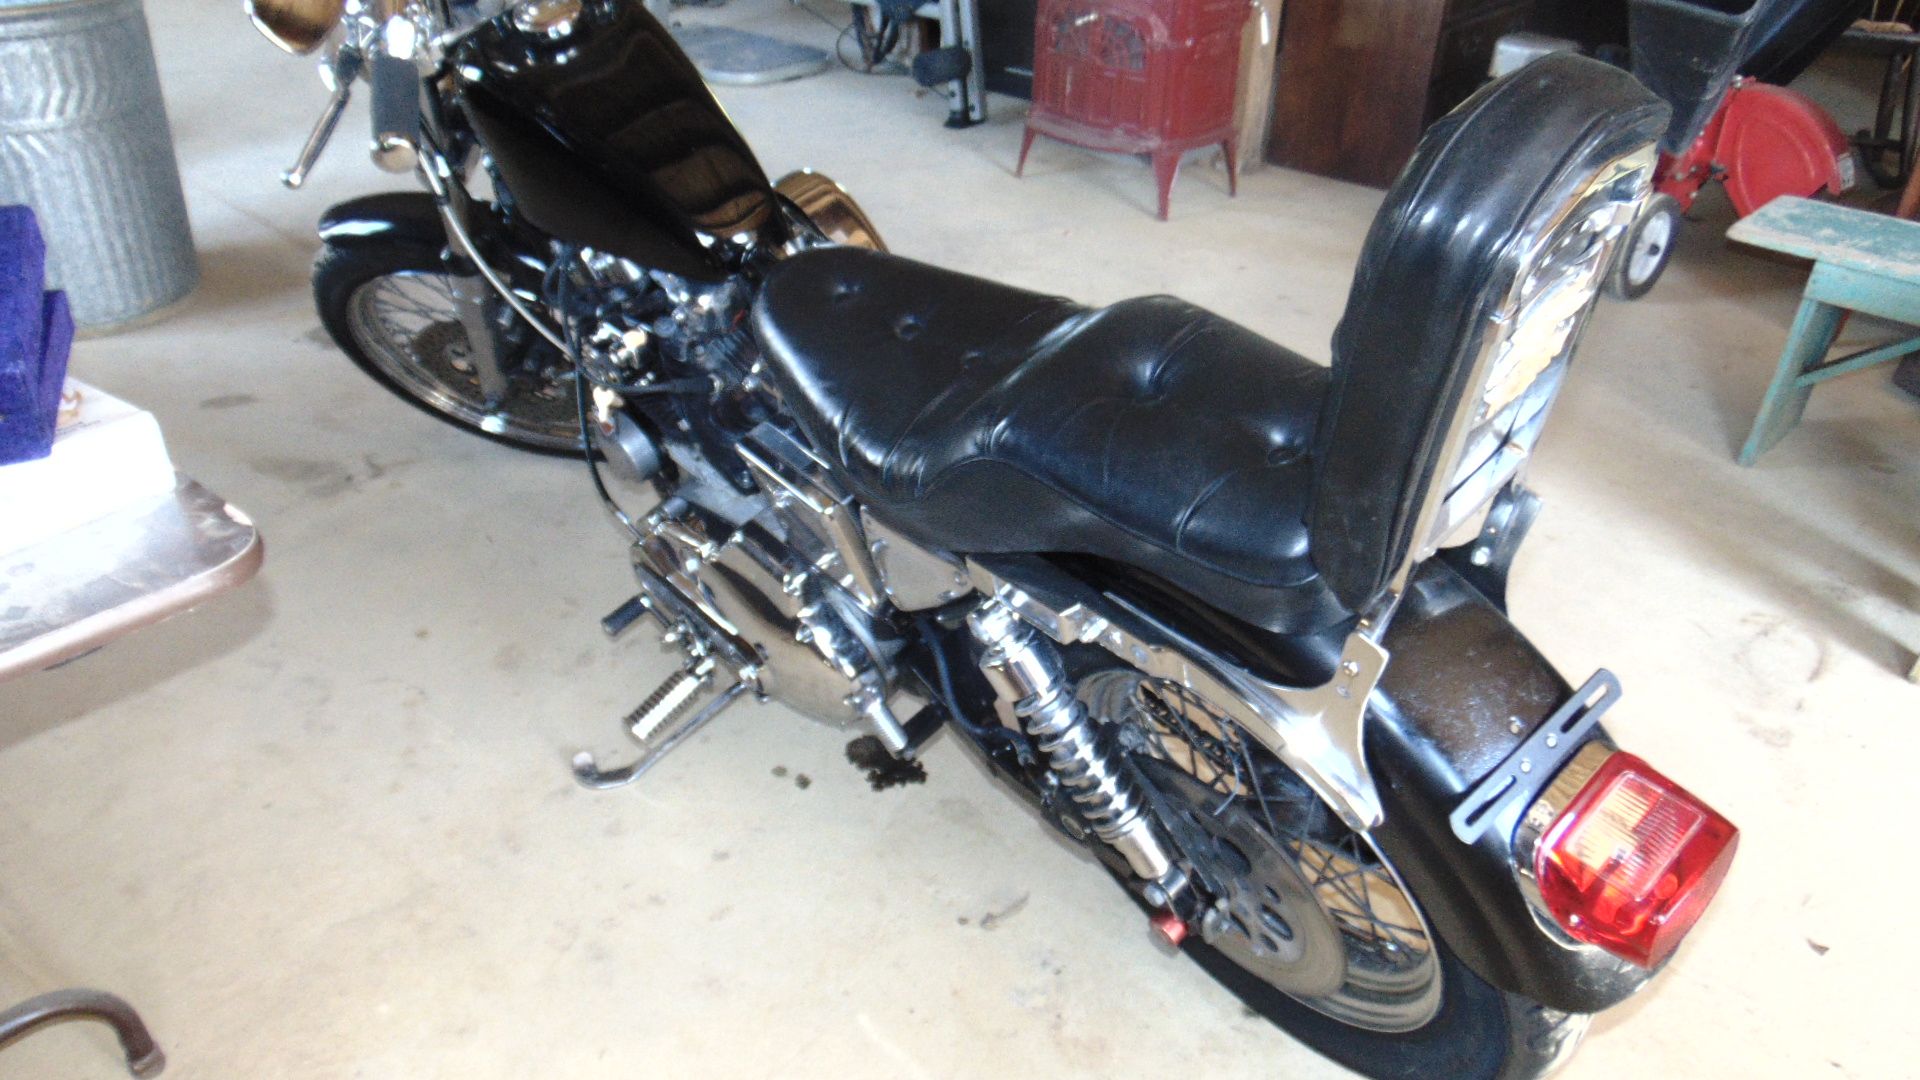 1983 Irion Head sportster - Image 2 of 3